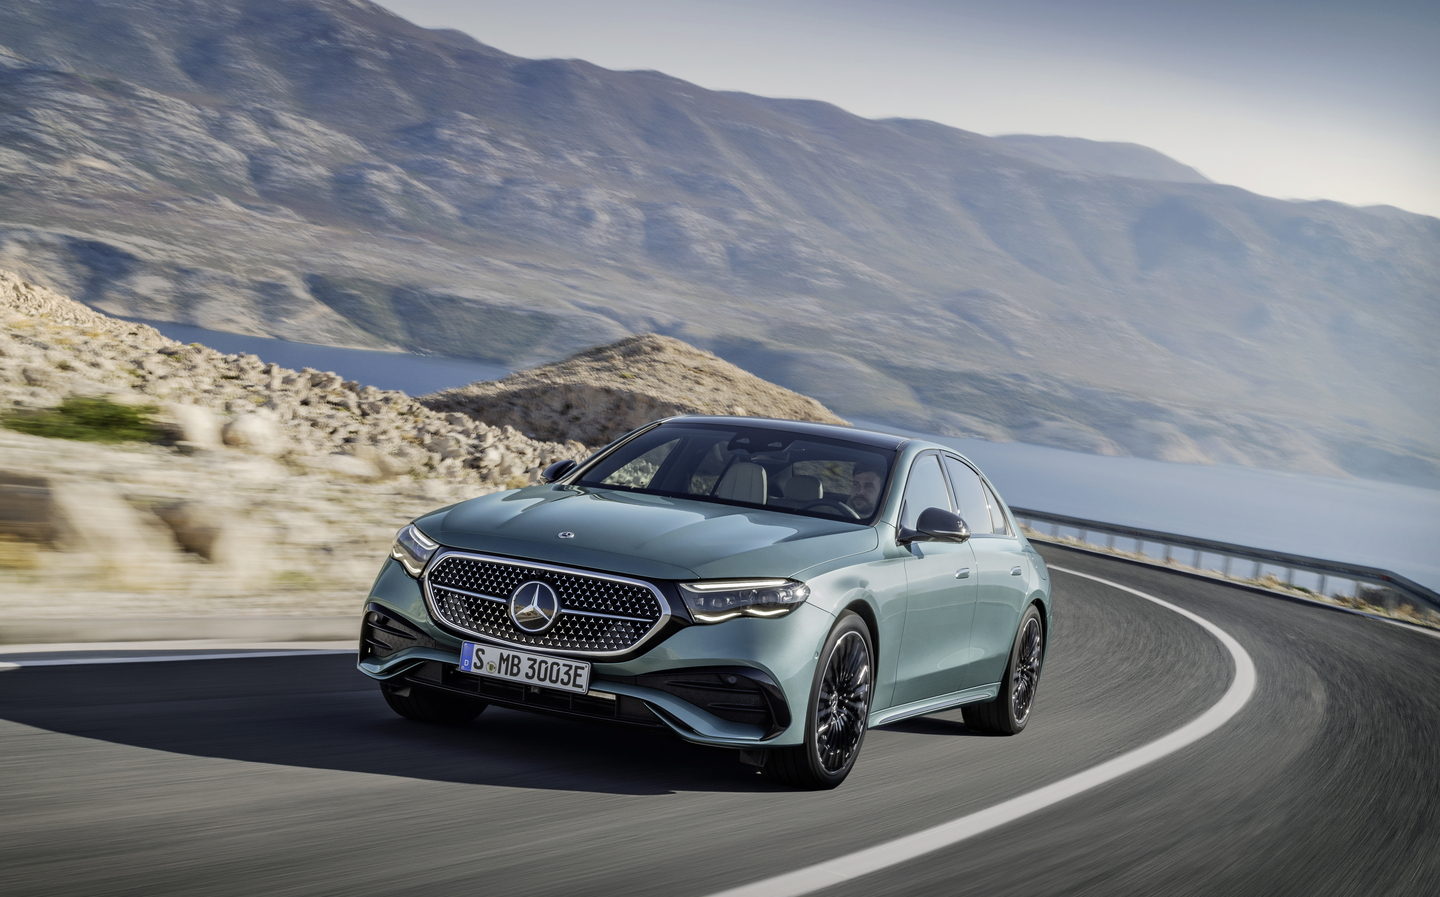 e-class, mercedes-benz, plug-in hybrids, new mercedes e-class revealed ahead with hybrid power, smoother body and high-tech cabin